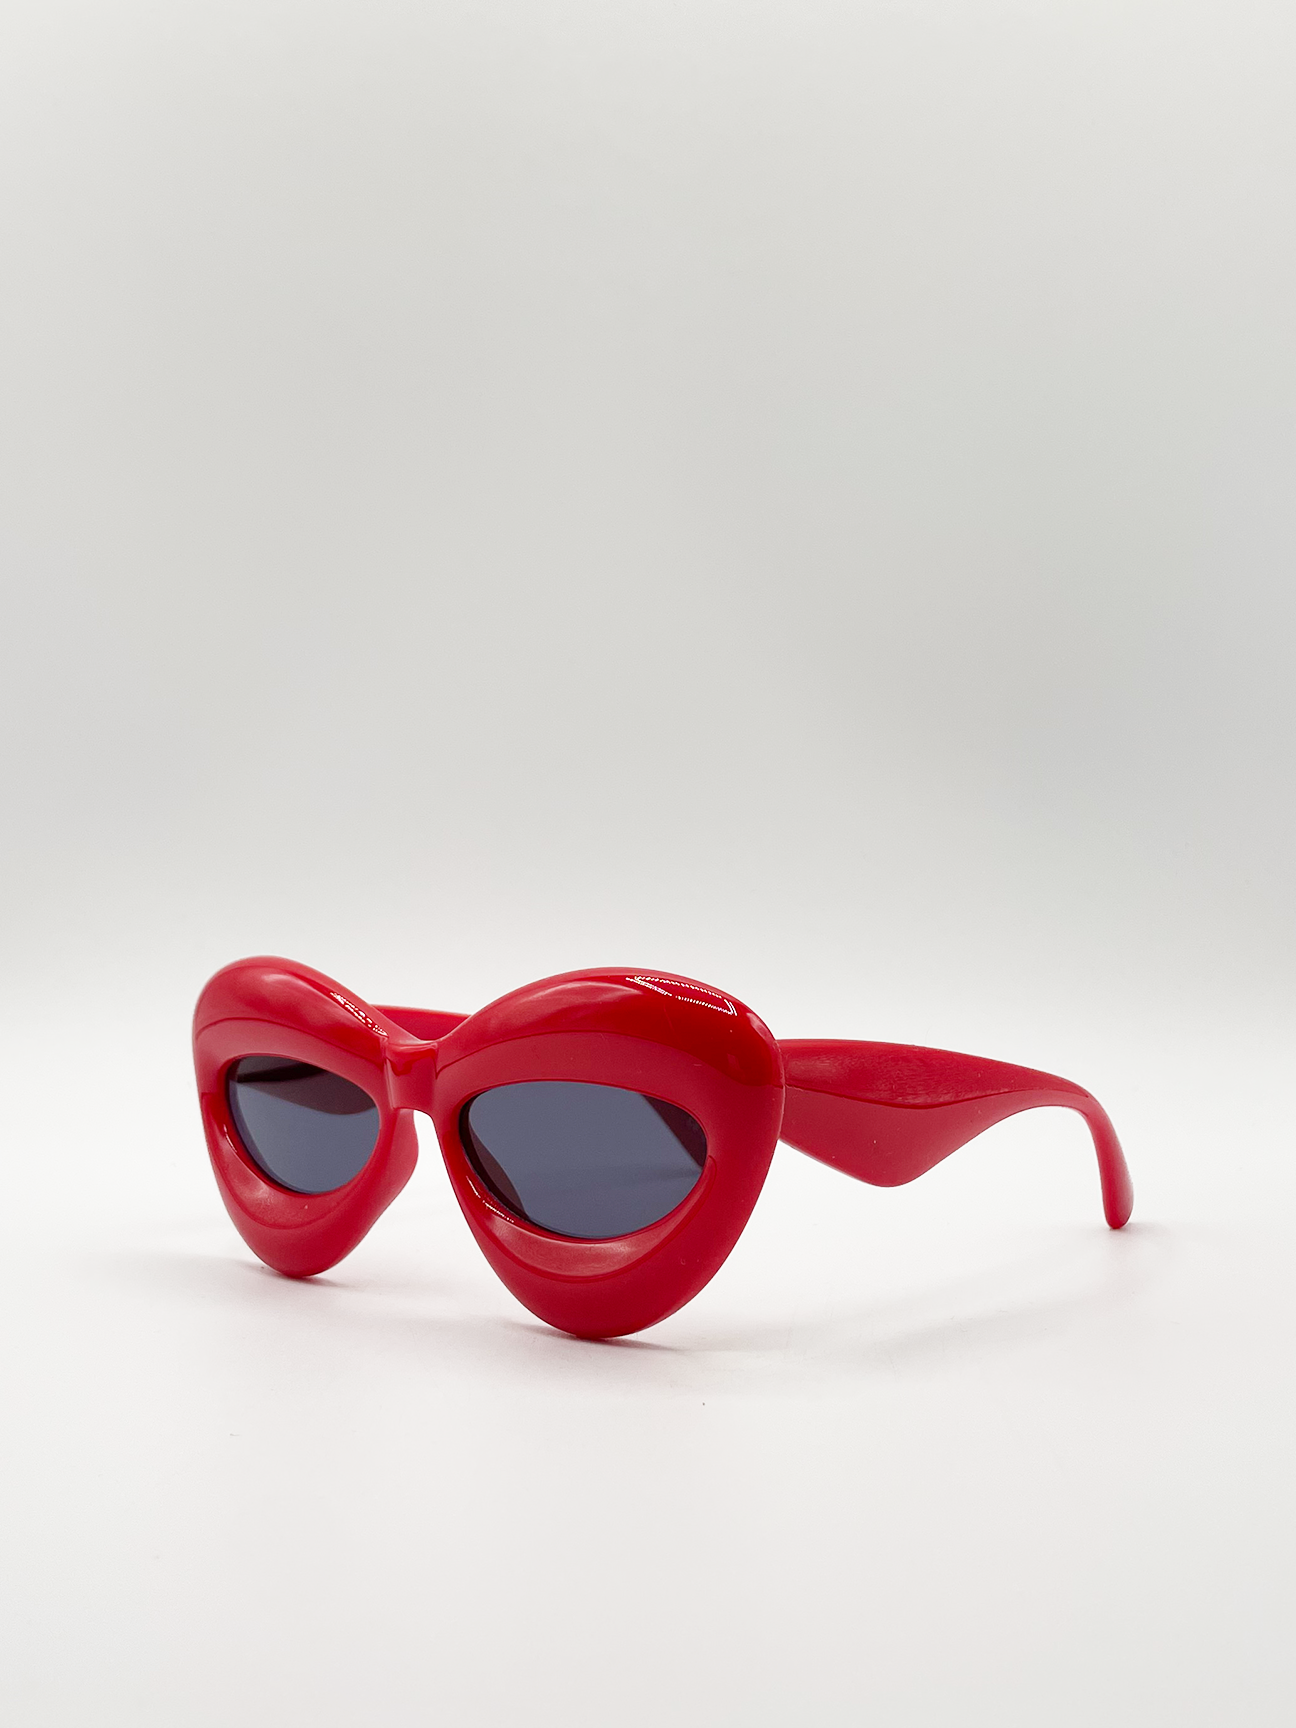 Chunky sunglasses in red